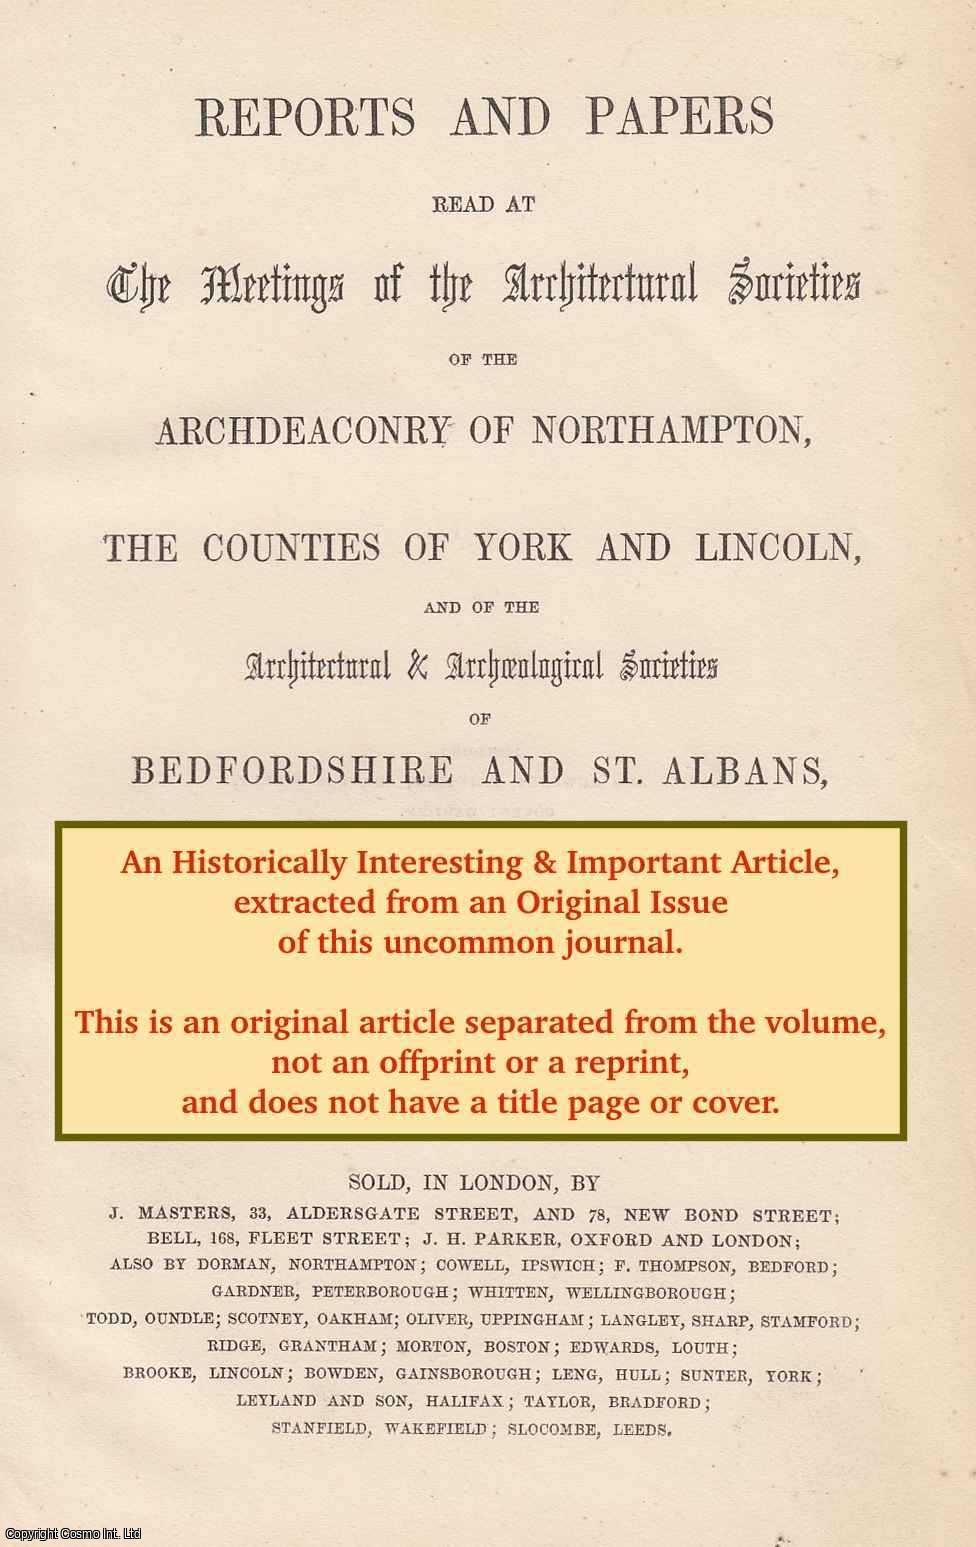 No Author Stated - The Canonization of St. Hugh of Lincoln. An original article from Associated Architectural Societies, Reports and Papers, 1956.